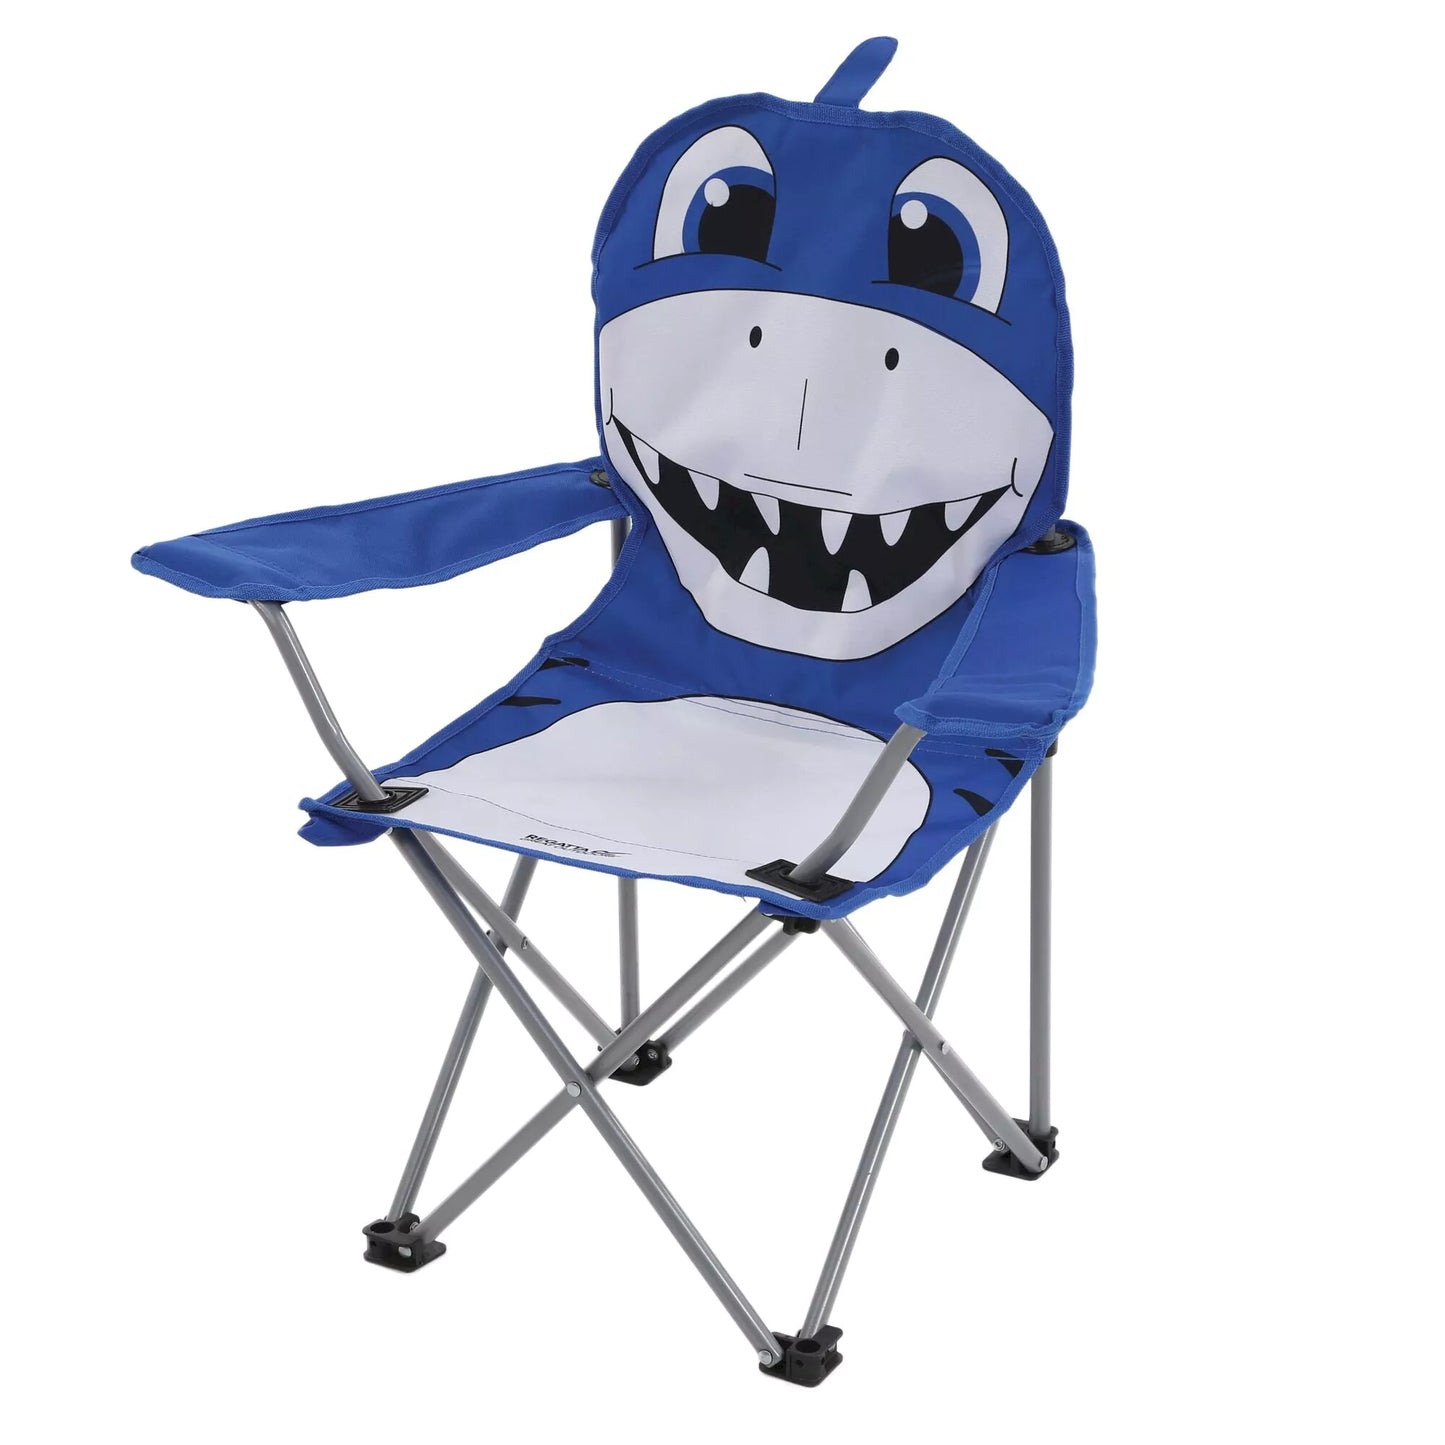 Regatta Animal Kids Chair - Available in store only